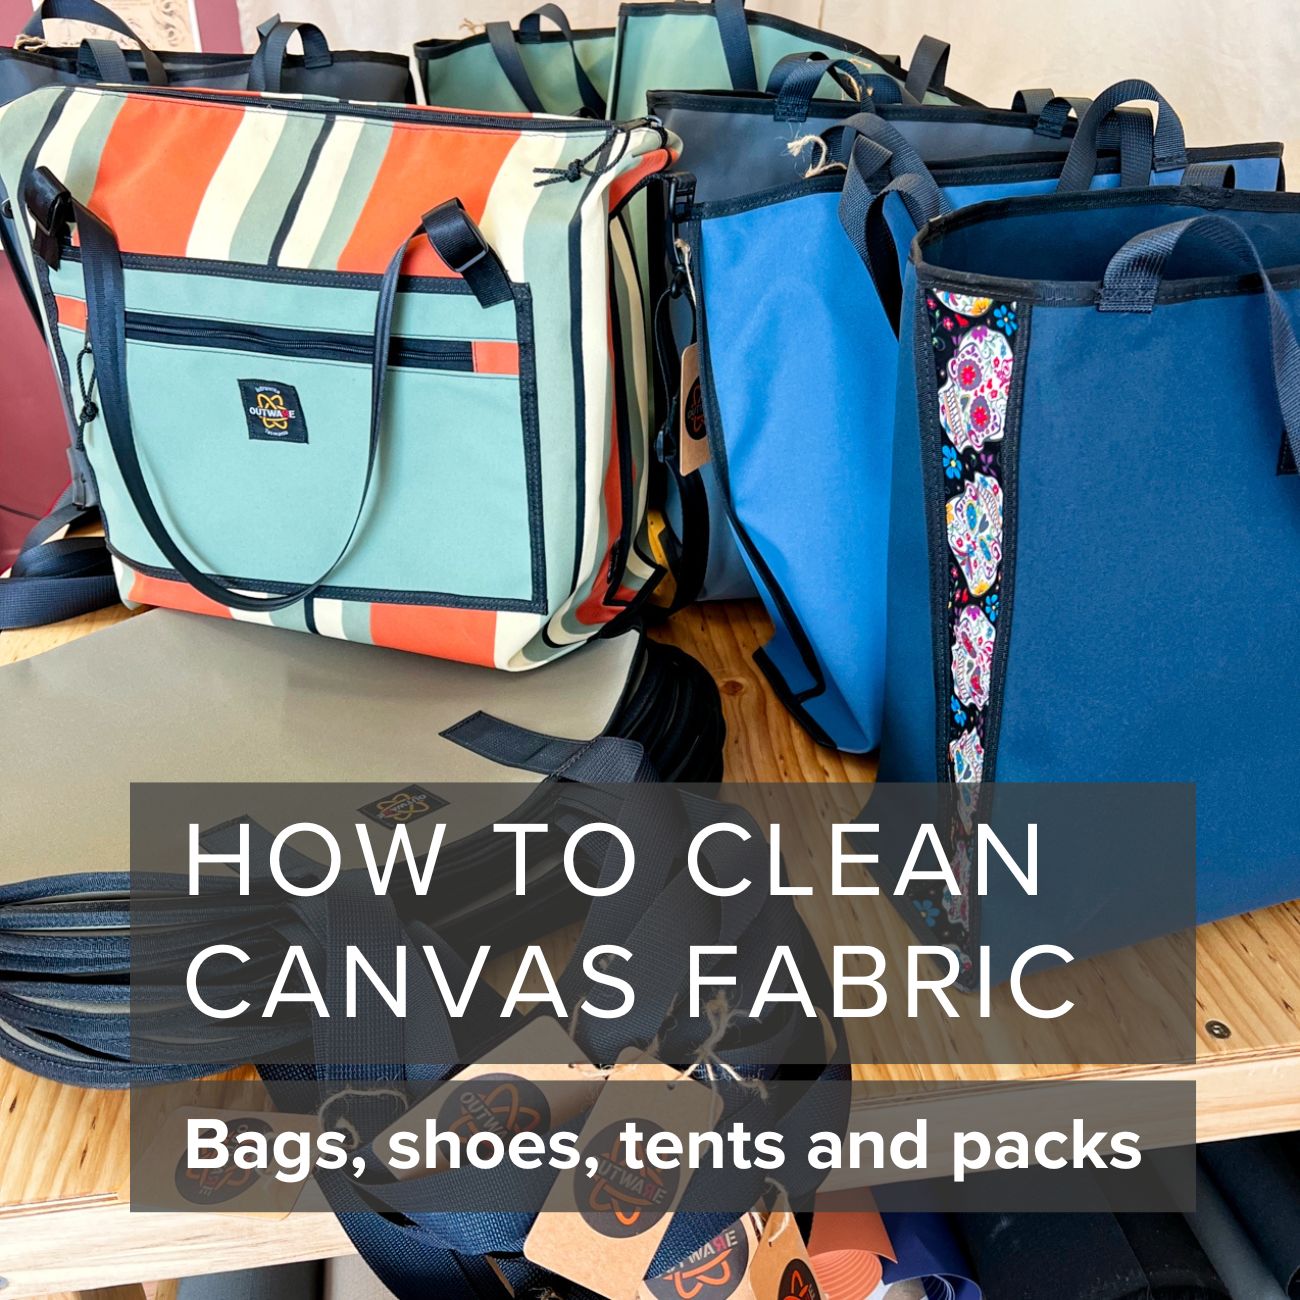 https://outware.net.au/wp-content/uploads/2023/07/How-to-clean-canvas-fabric-1.jpg